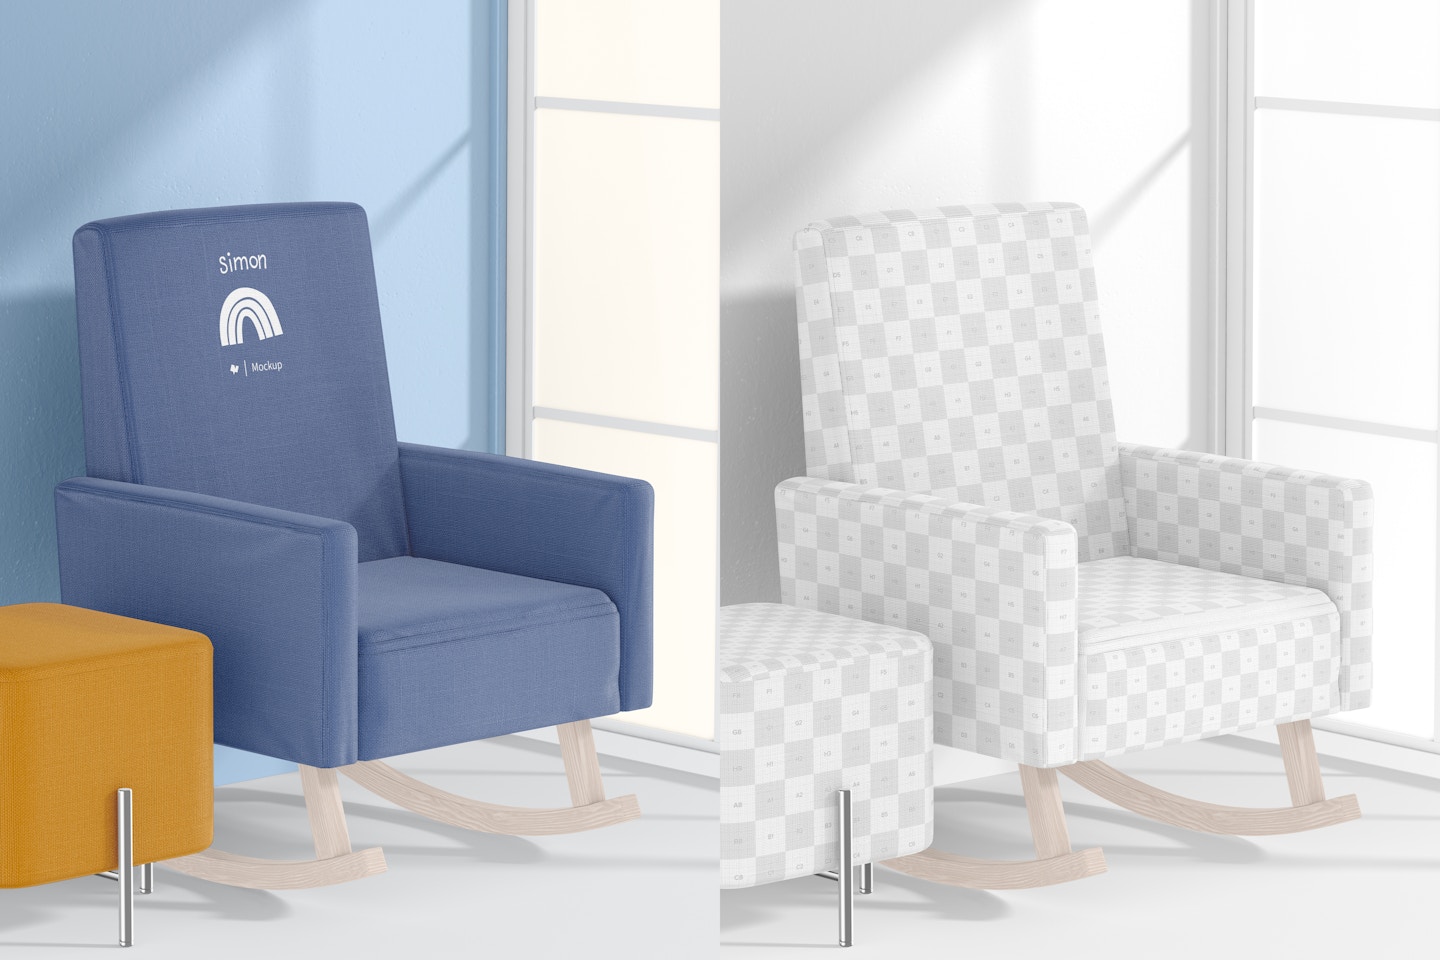 Square Rocking Chair Mockup, with Pouf